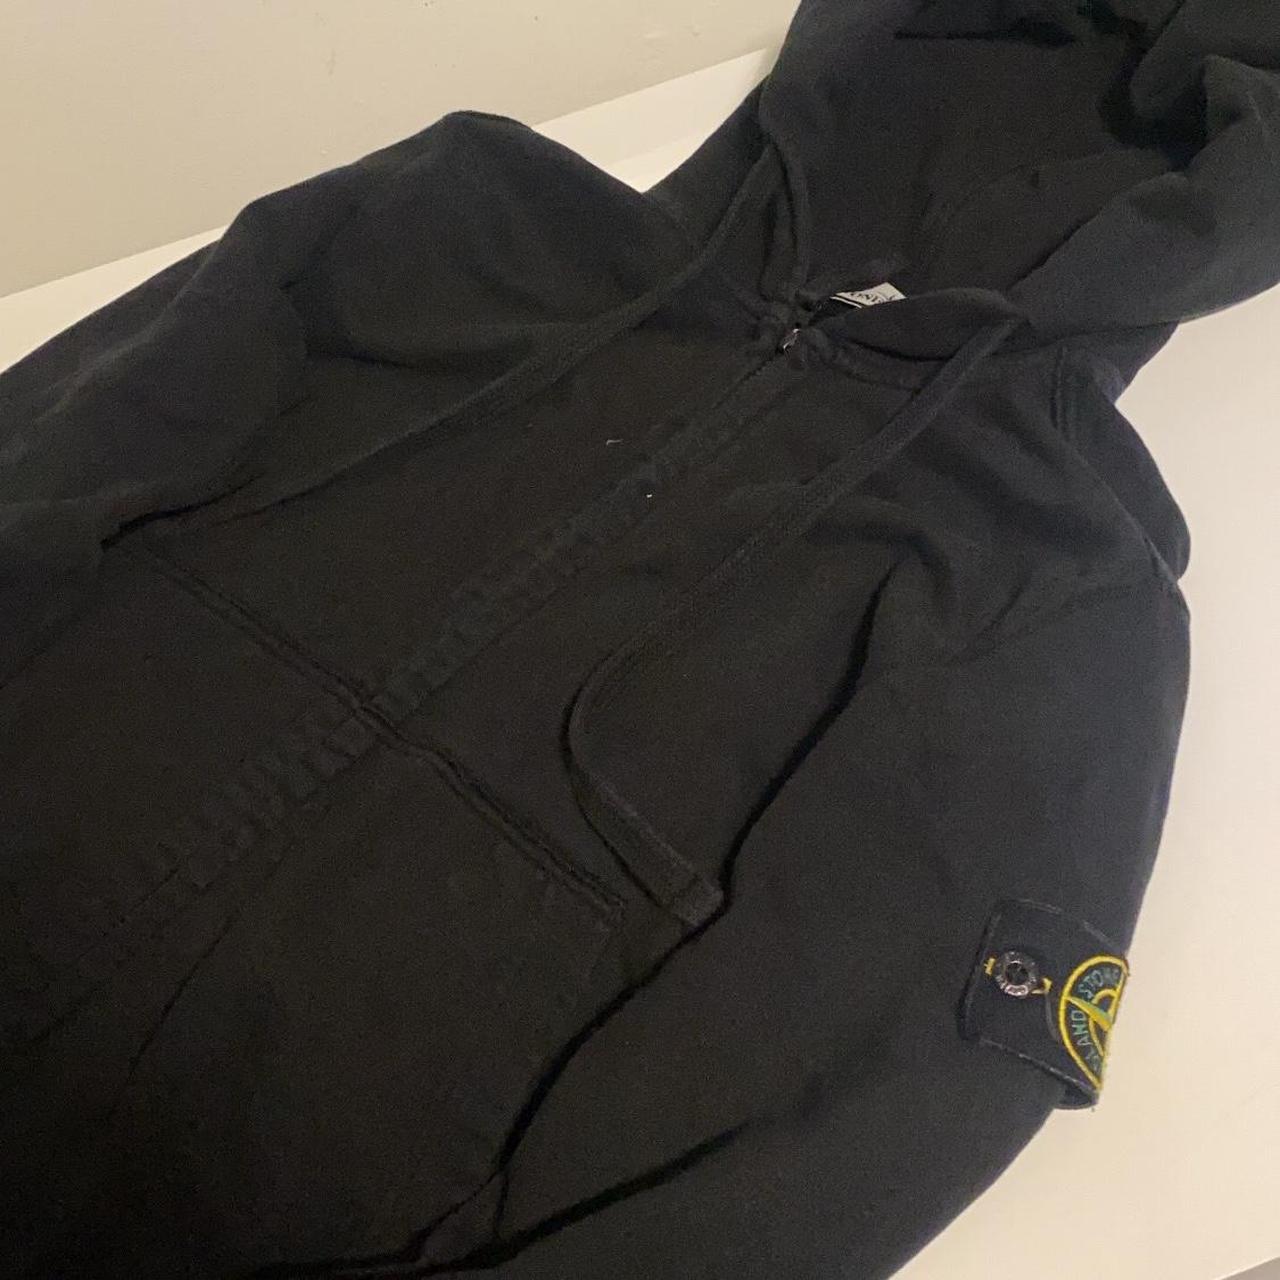 Stone Island Zip Up Hoodie Size Small Condition... - Depop